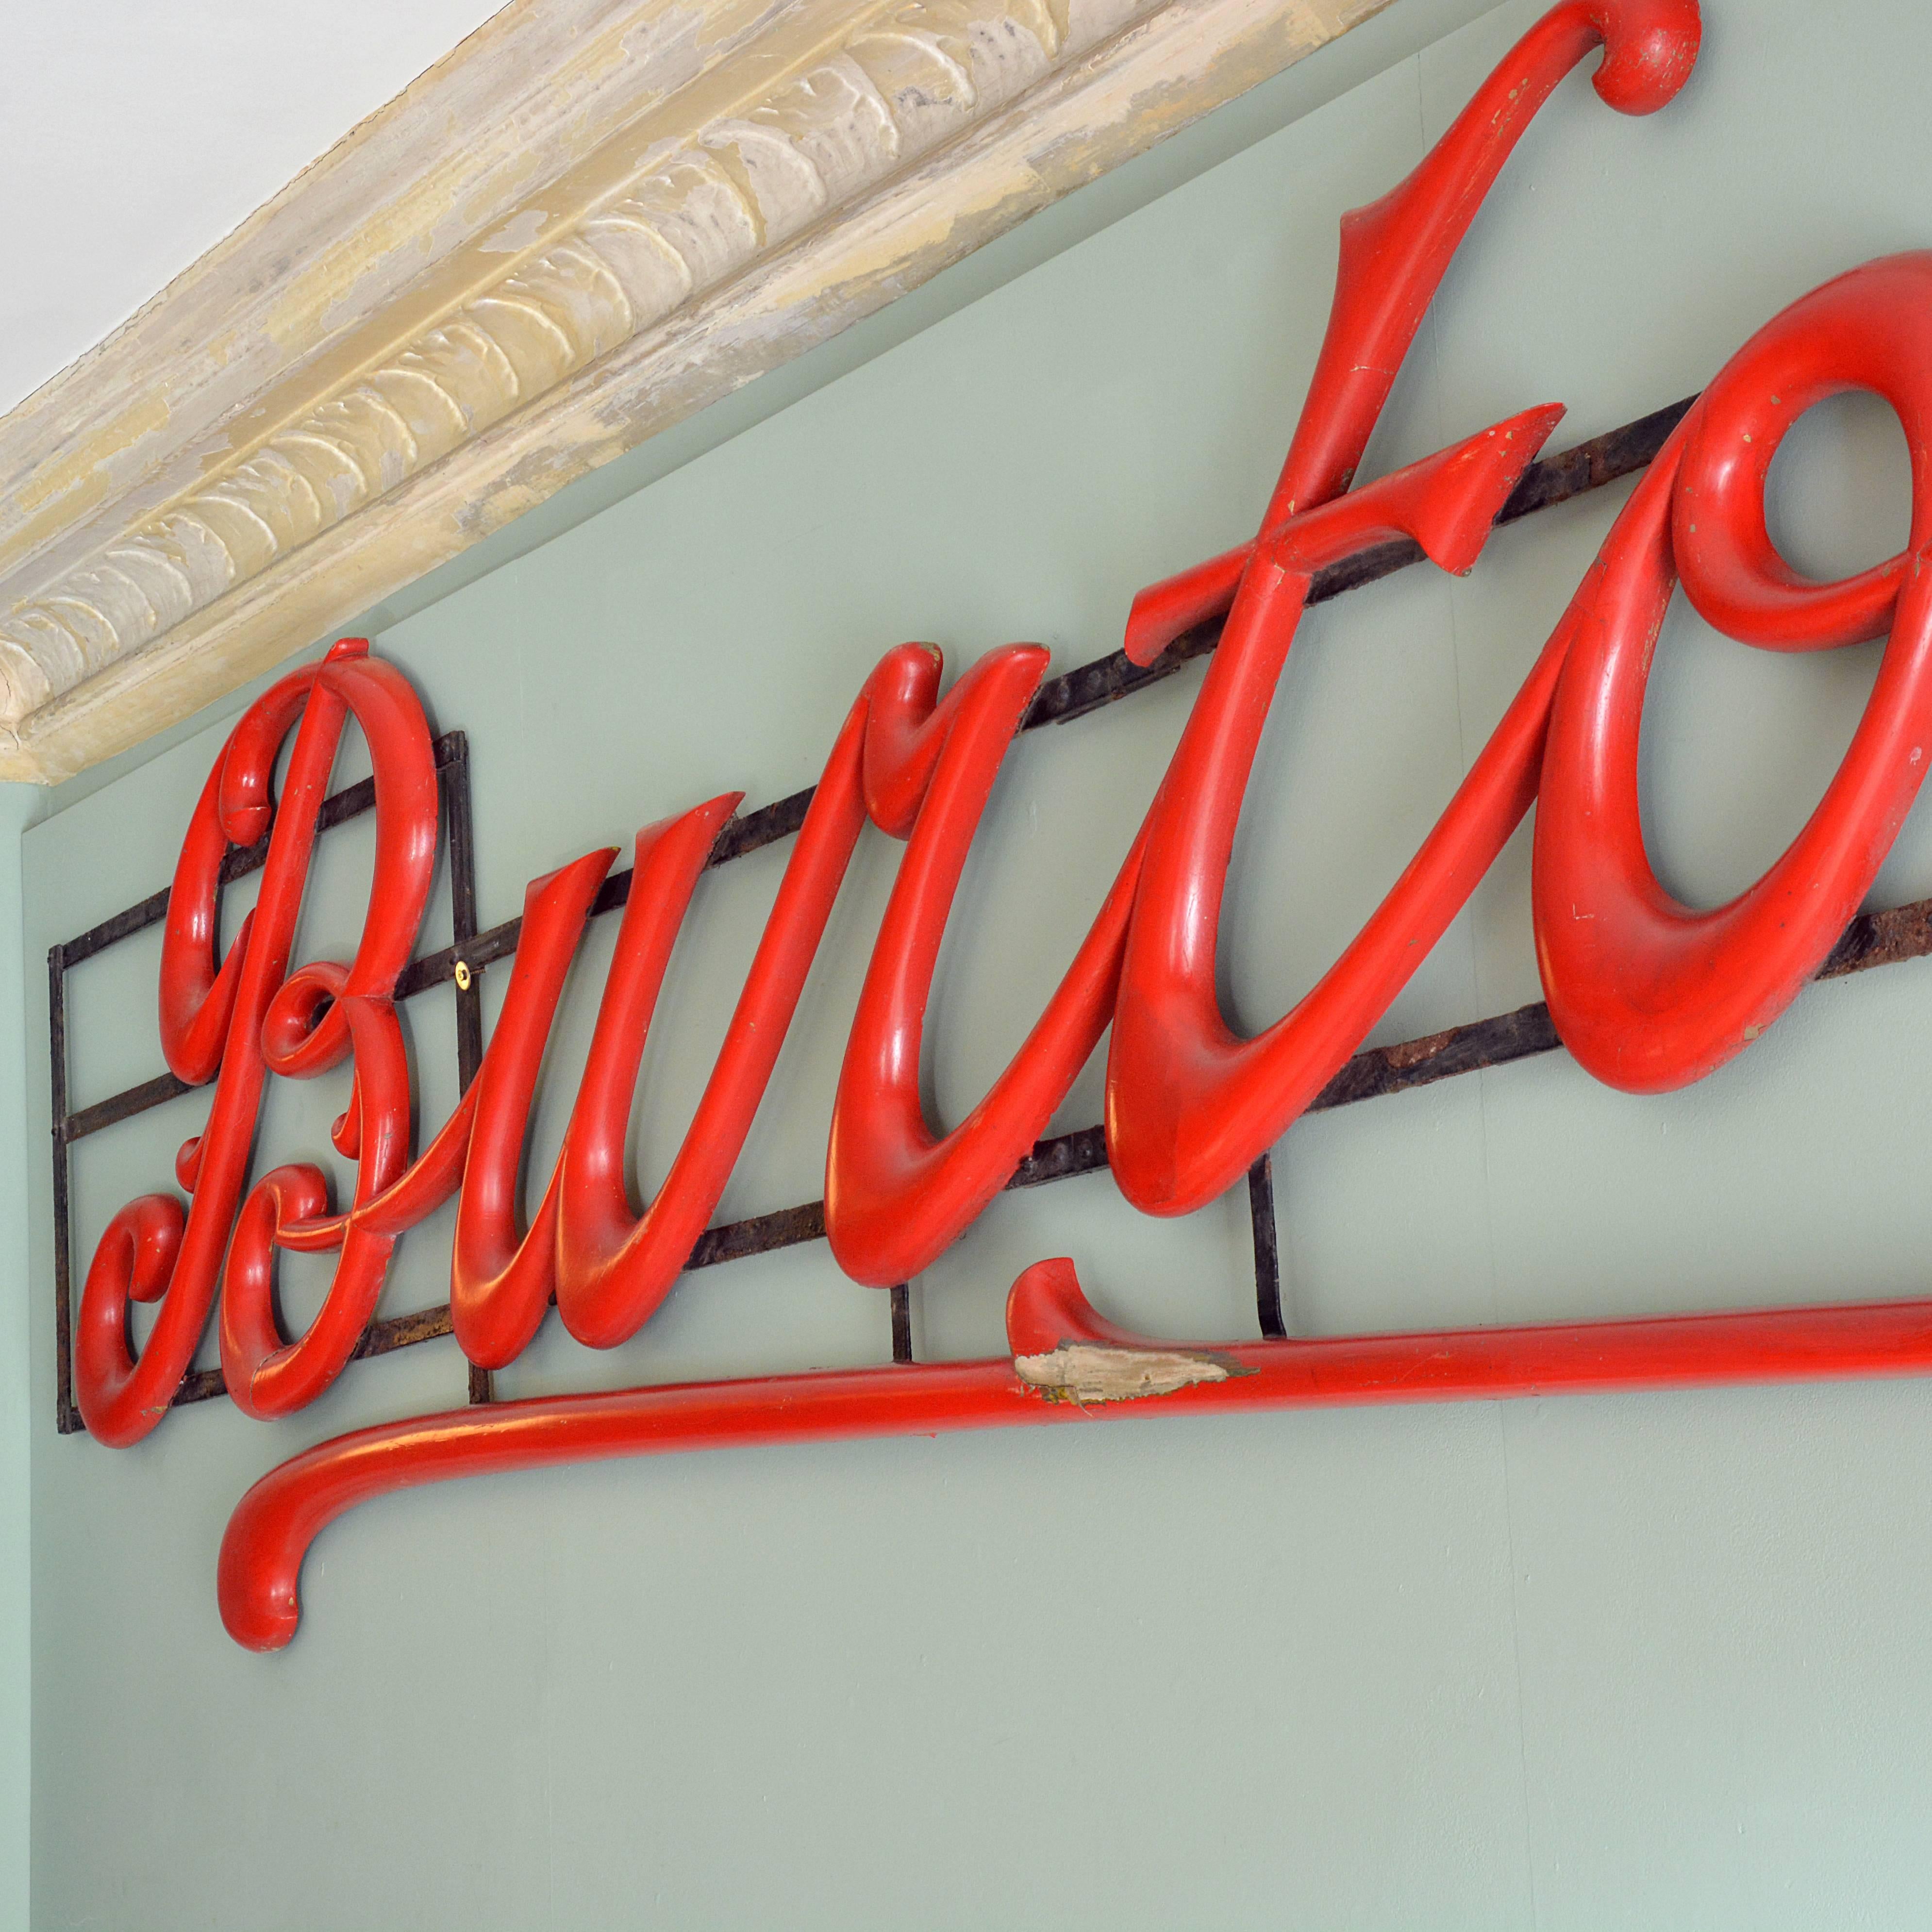 A large carved timber 'Burton's' serif-script shop sign, mounted on iron frame. Old red paint over original gilt finish.

Available to view at Brunswick House, London.

Dimensions: 403cm (158¾") wide, 90cm high, 6cm (2¼") deep.
 